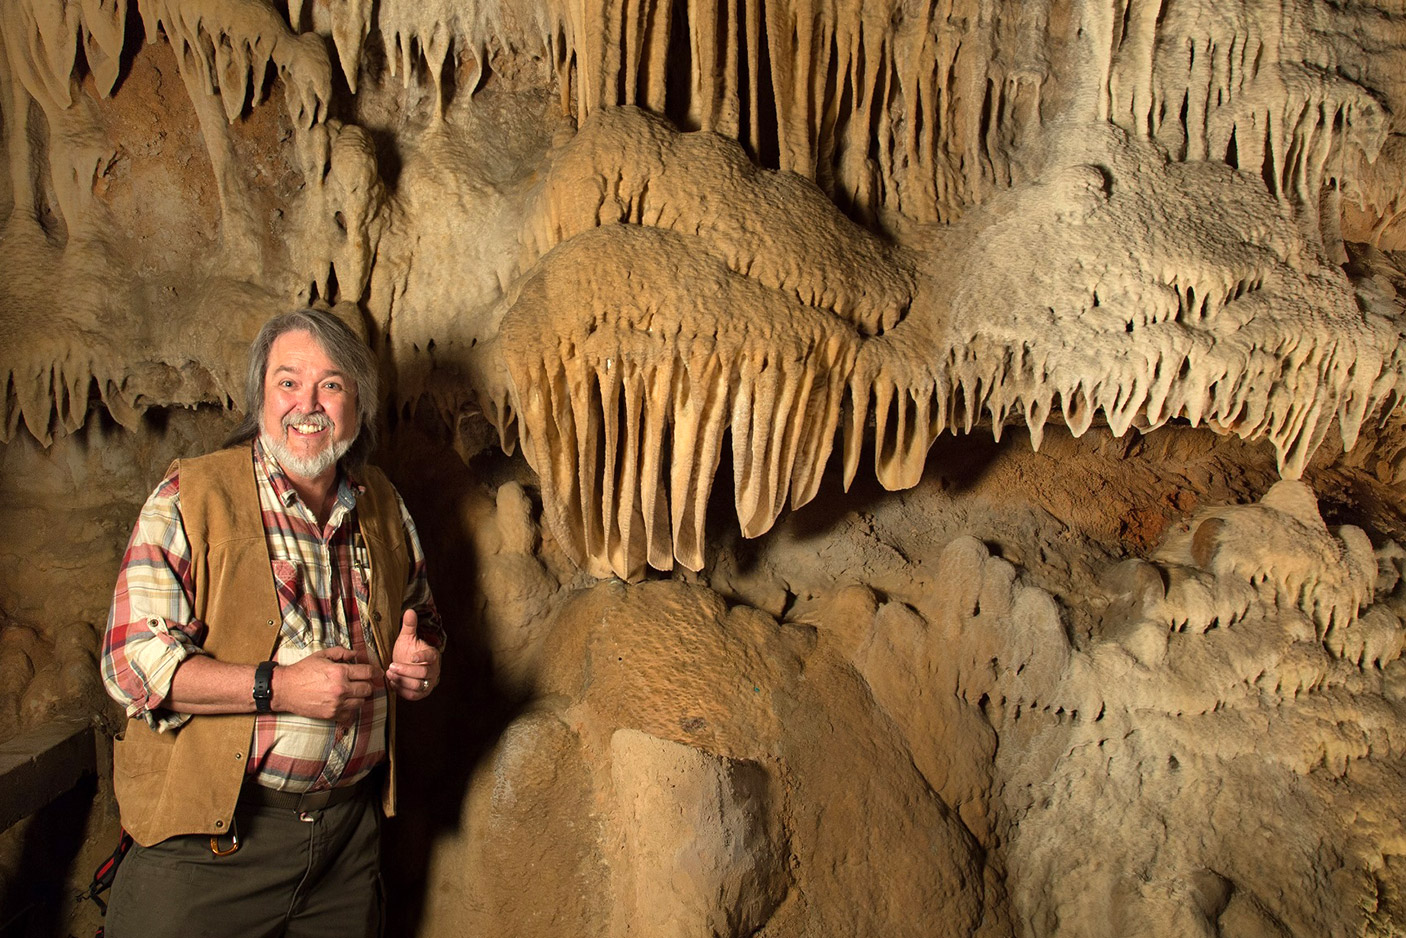 man posing with cave formations